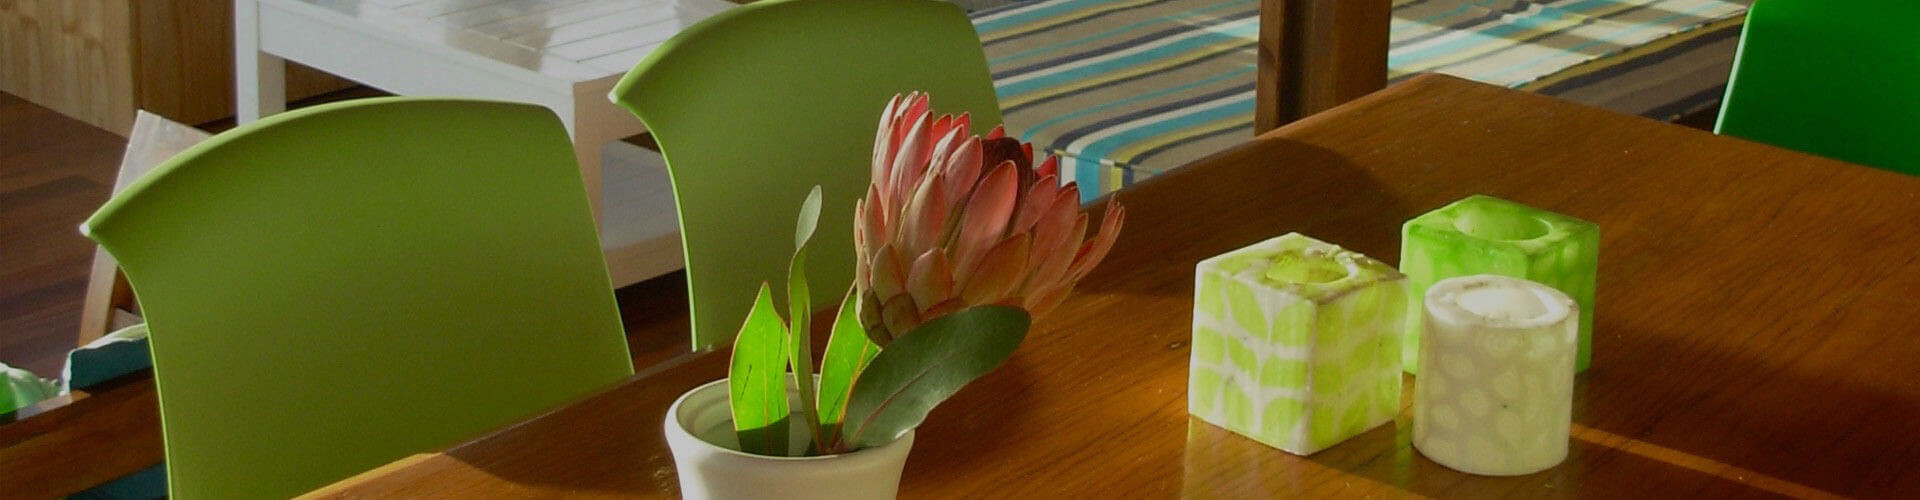 A pink protea flower rests in a white vase on a brown table, inside the Cat's Whiskers rental villa at Cliff Top Houses in the Wilderness South Africa.